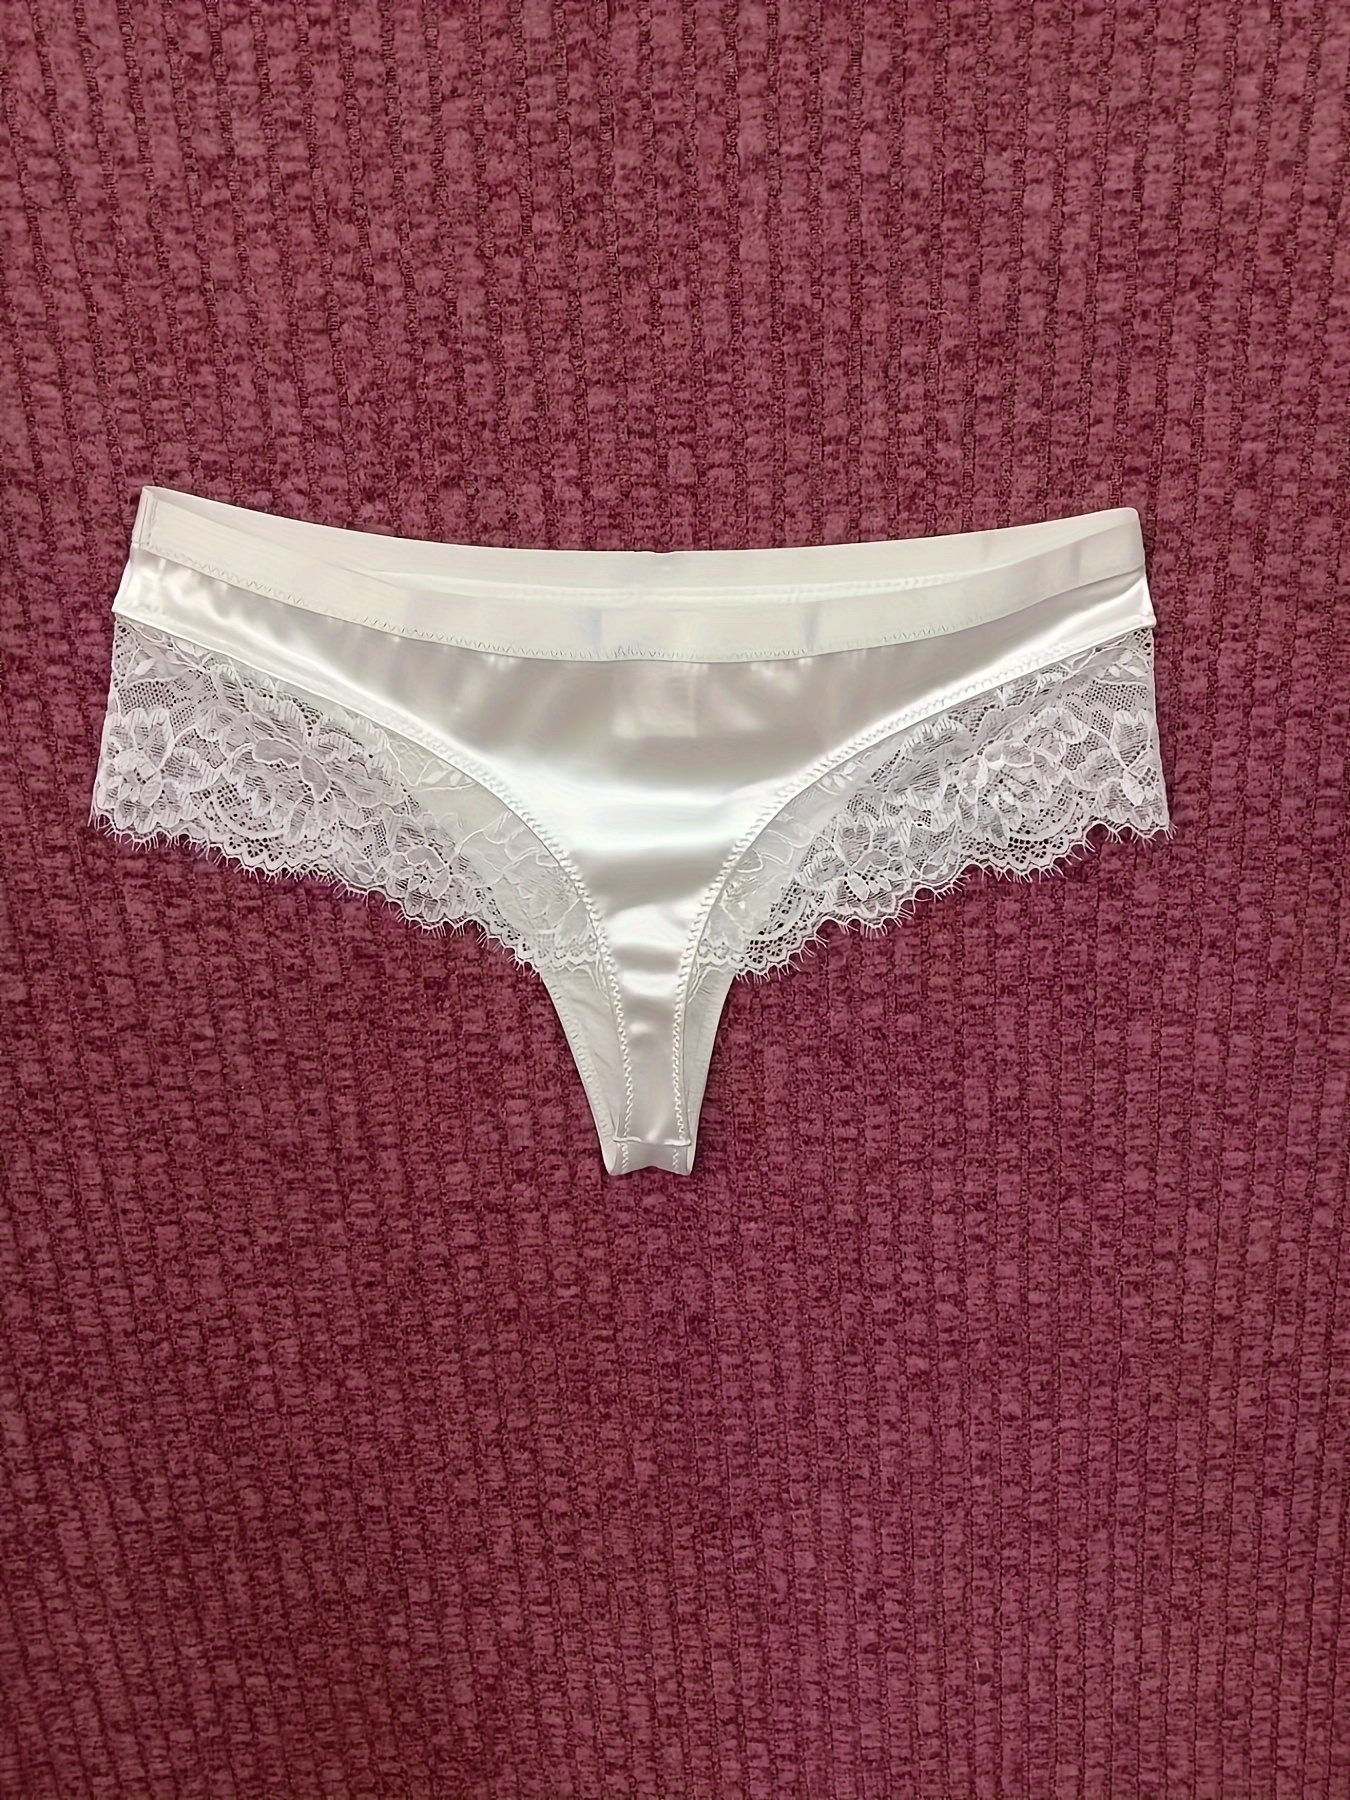 Sexy Floral Lace Sheer Thongs Low Waist Open Crotch G string